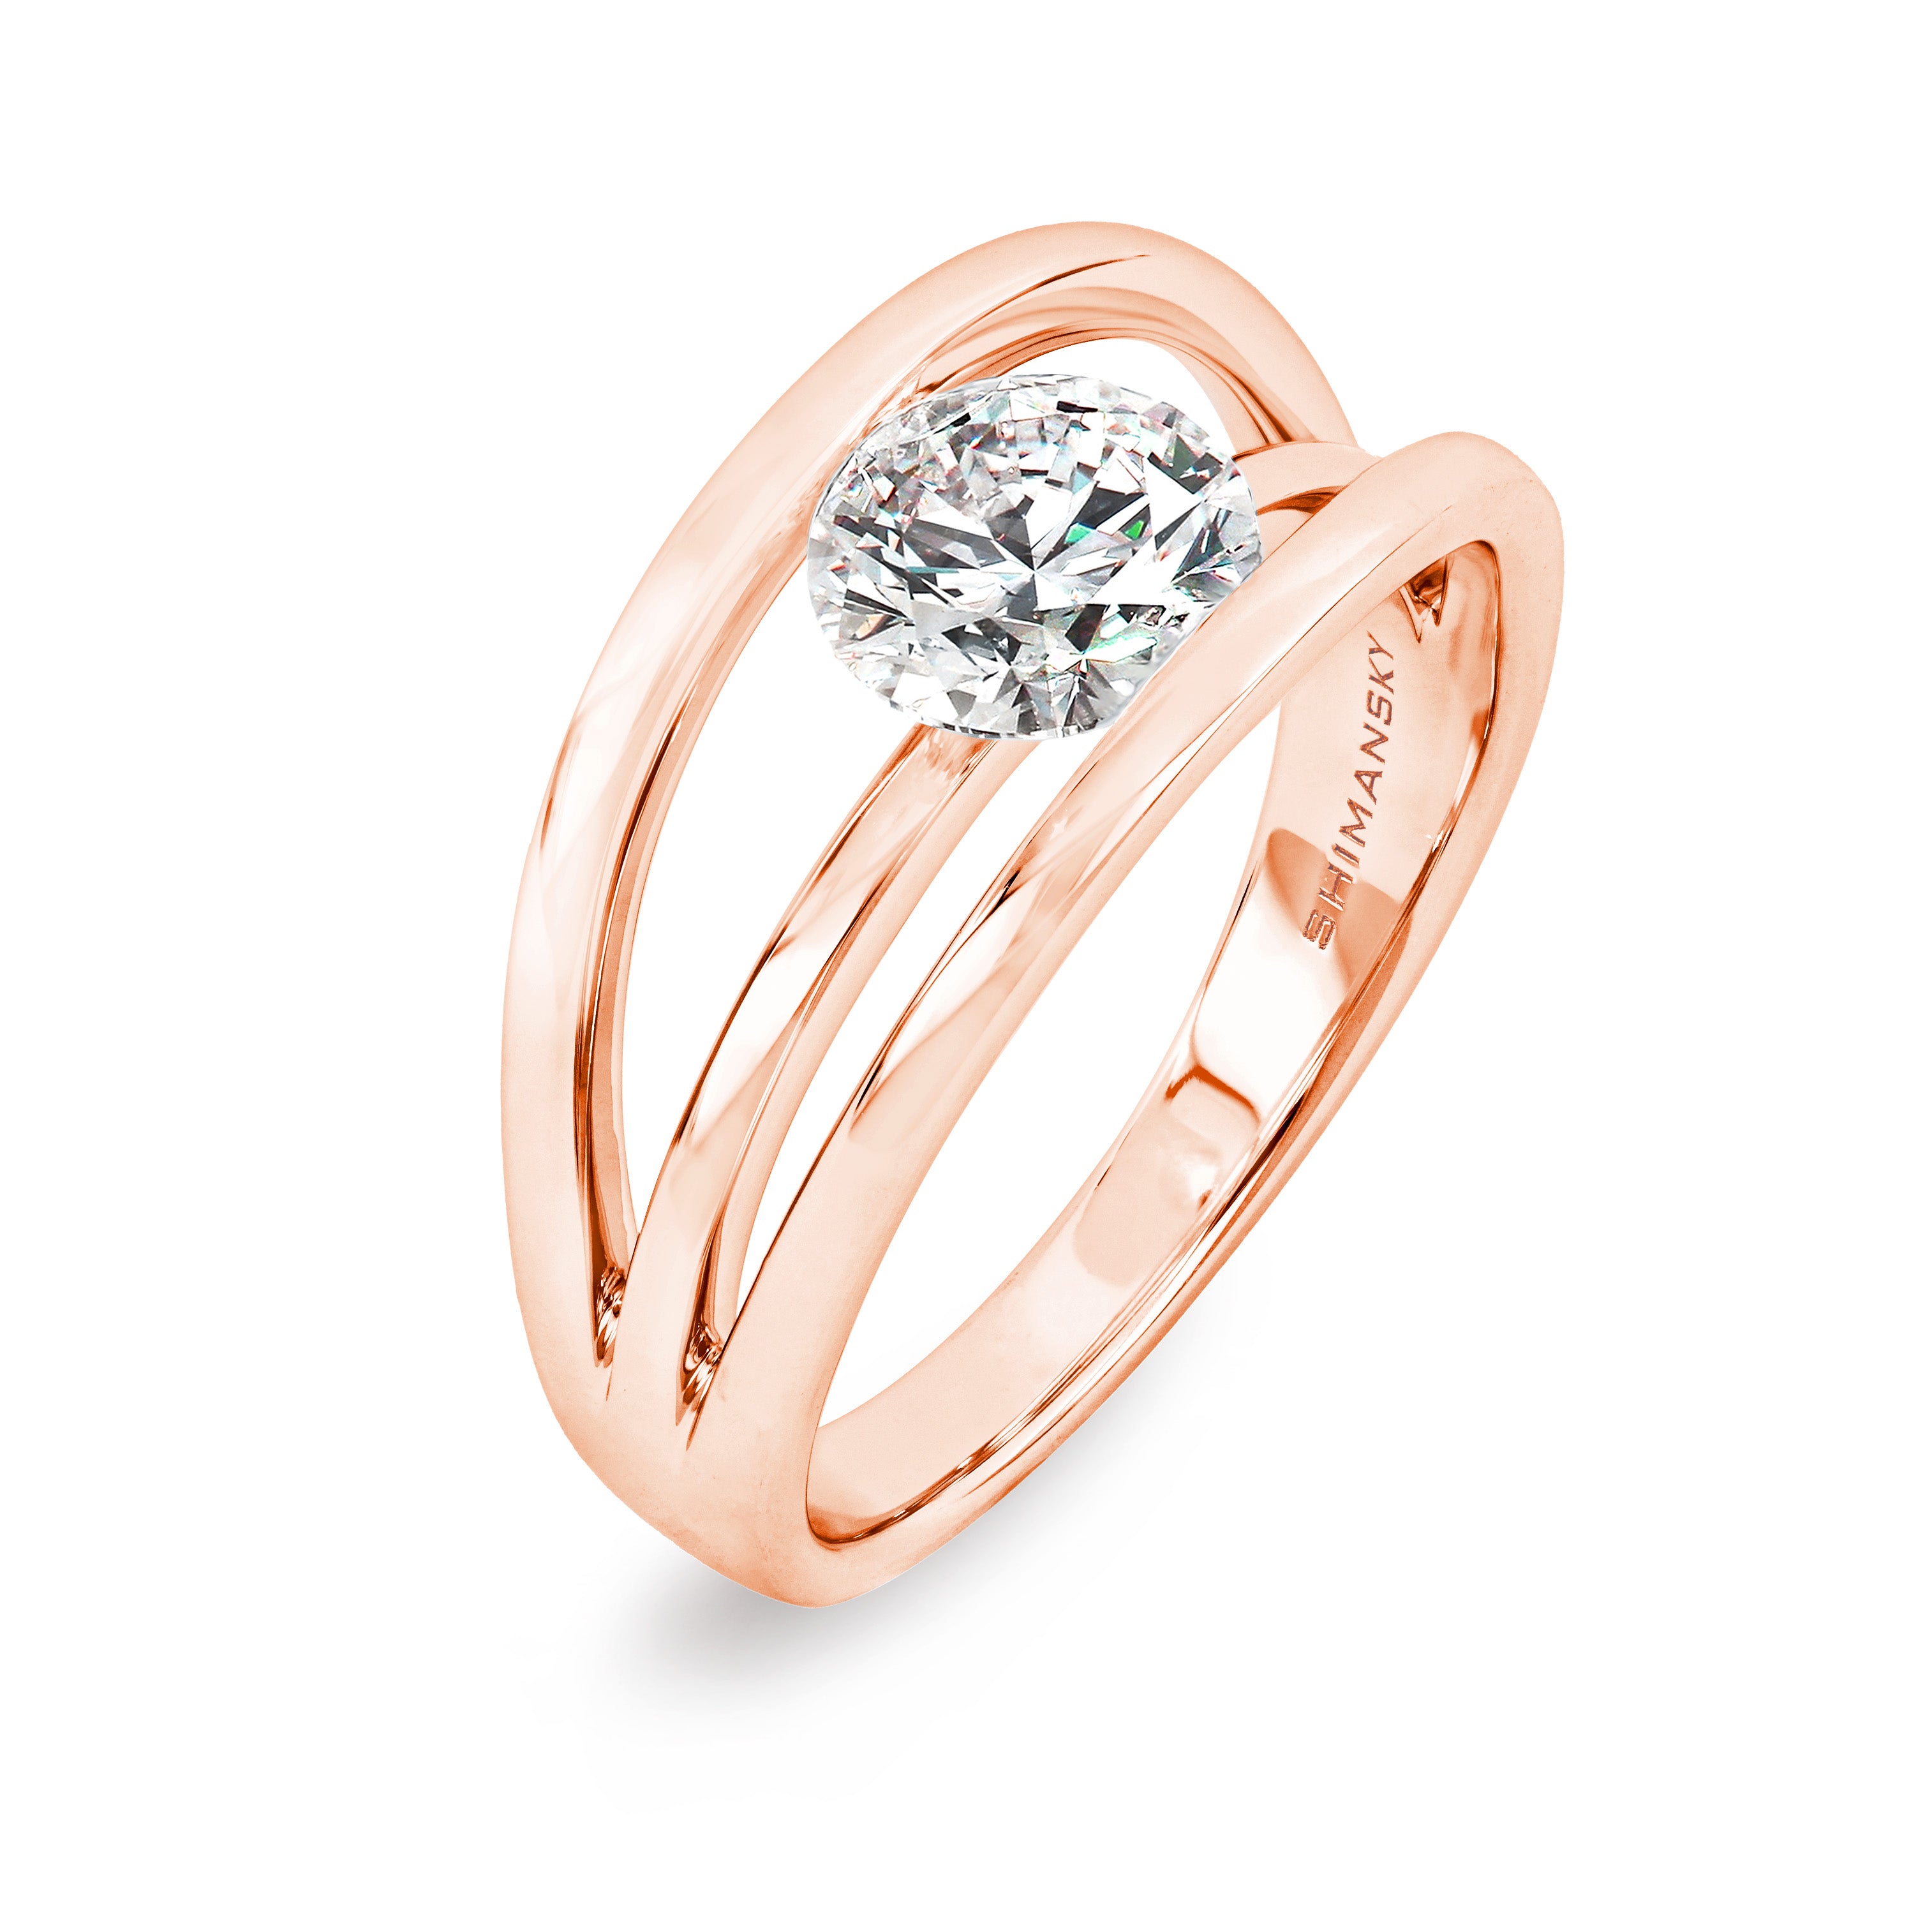 Evolym Diamond Engagement Ring 1.00 Carat in 18K Rose Gold 3D View